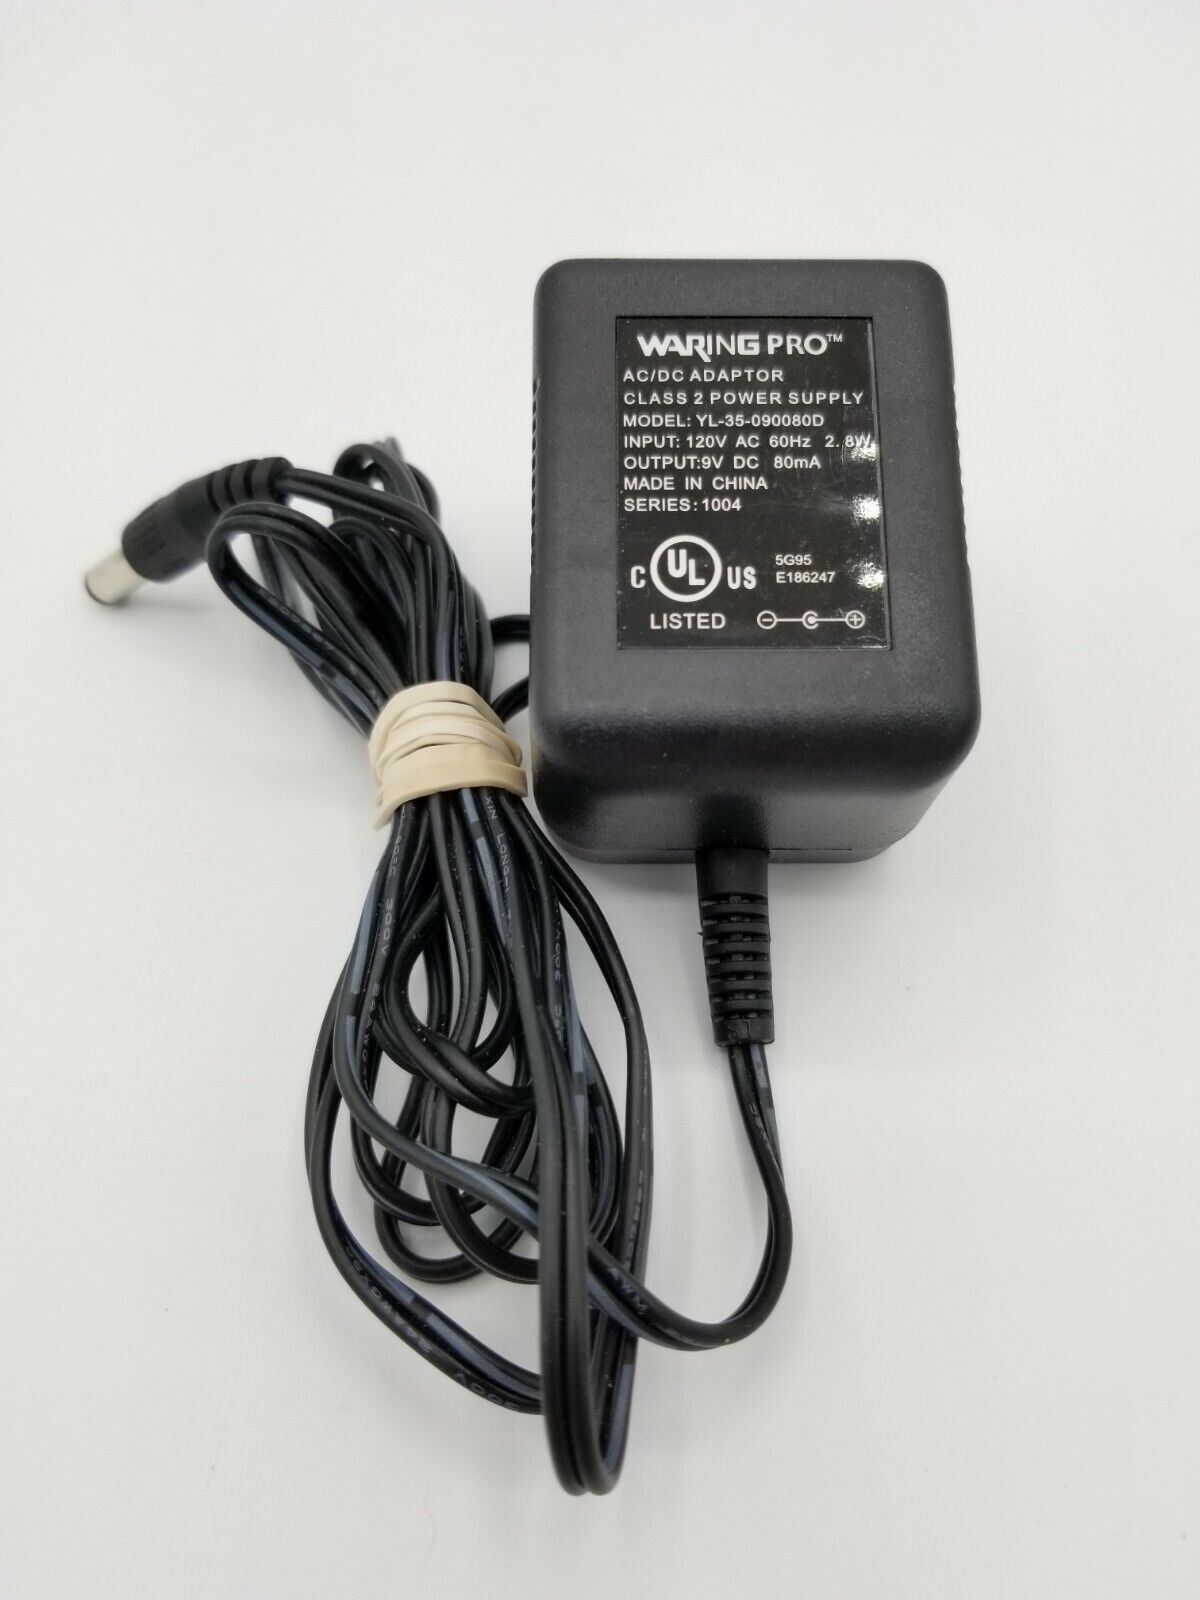 *Brand NEW*Waring Pro Charger AC/DC Adaptor Power Supply YL-35-090080D 9V 80mA Series 1103